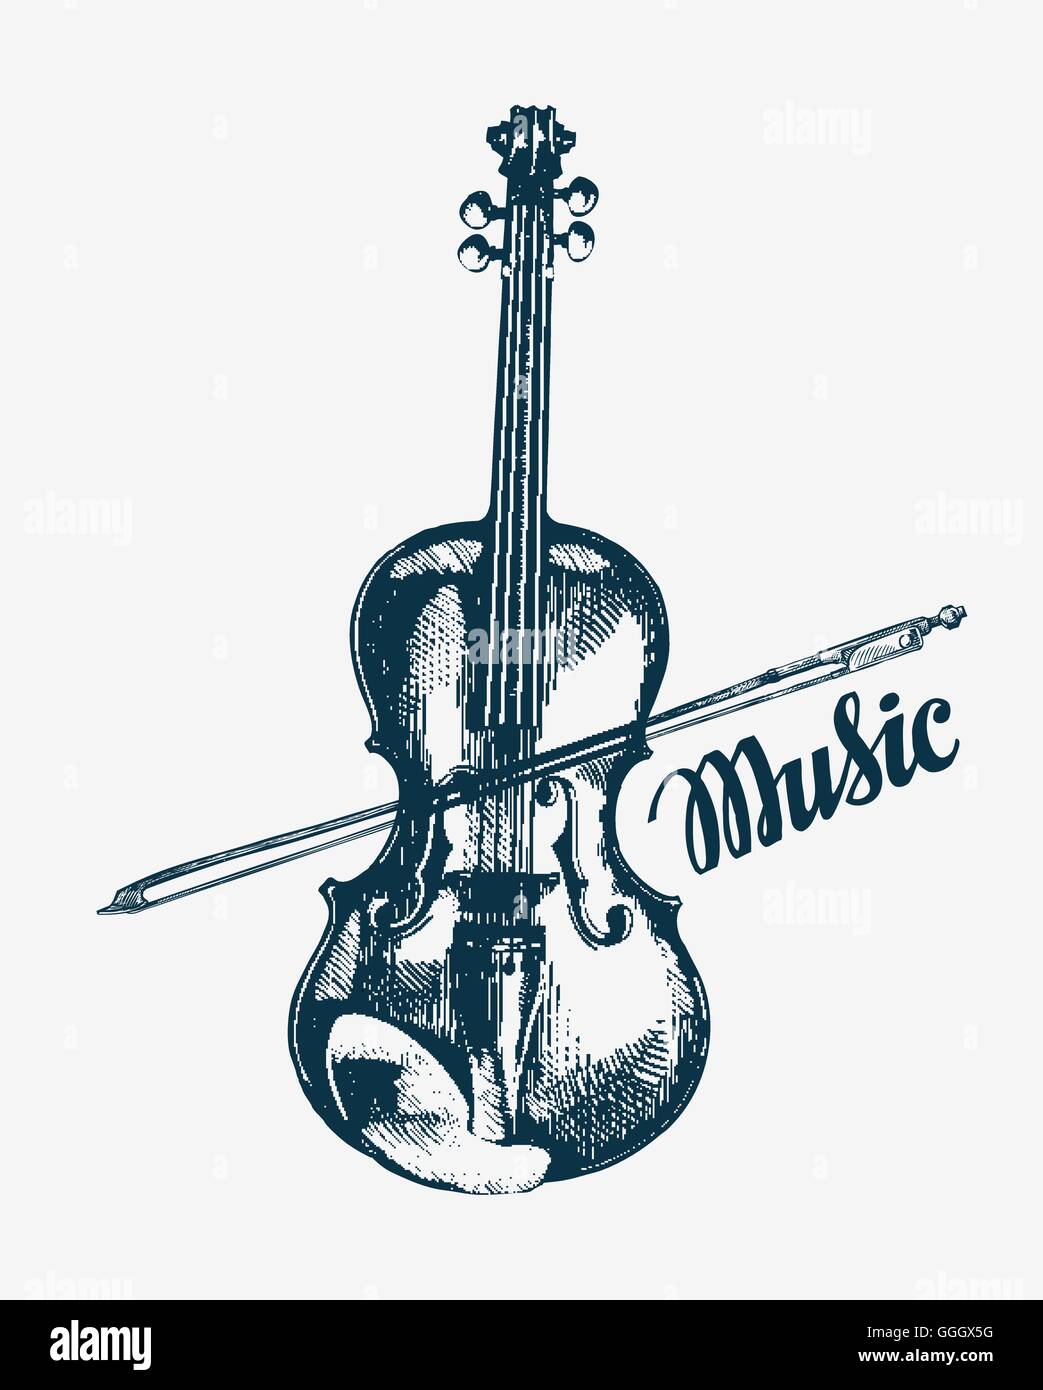 Musical Instruments Sketch Icon by macrovector | GraphicRiver